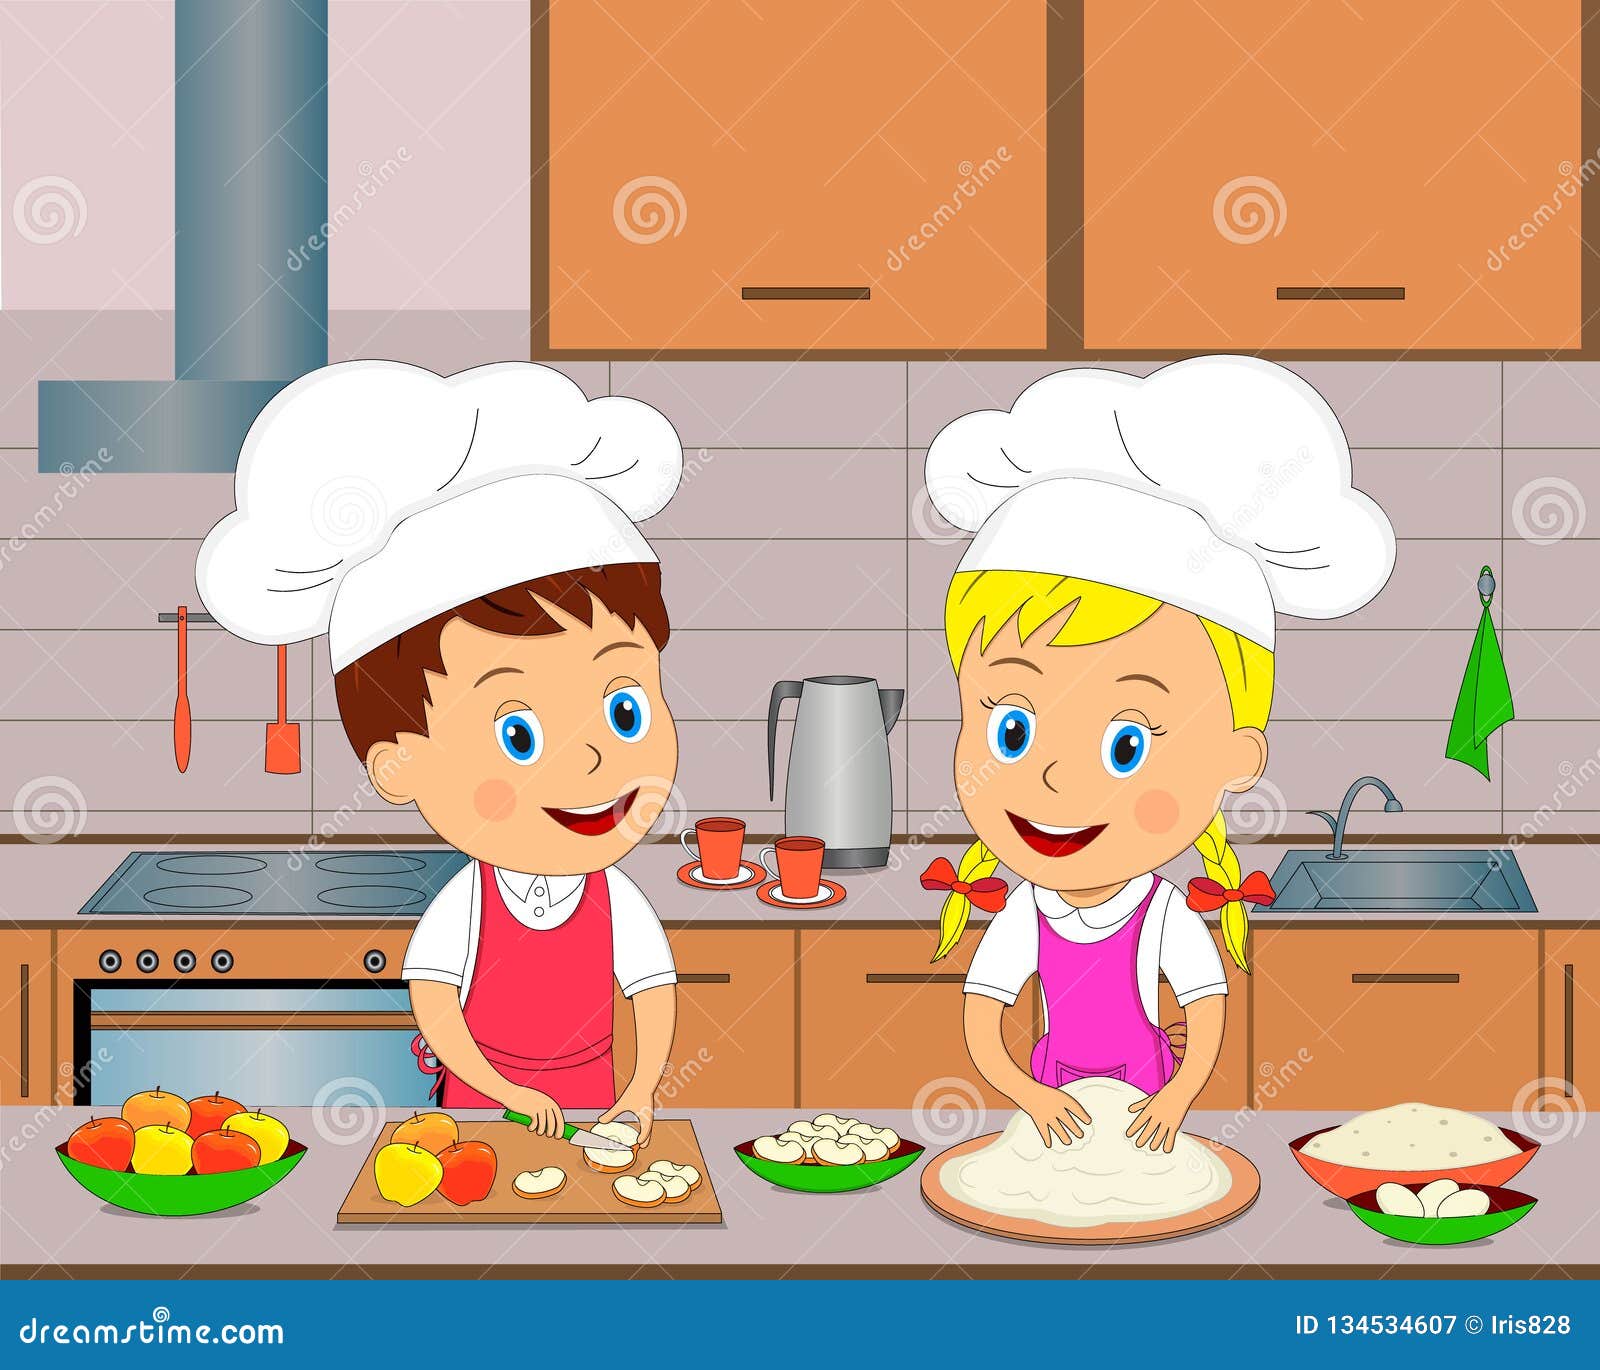 Boy and girl are cooking stock vector. Illustration of cookie - 134534607